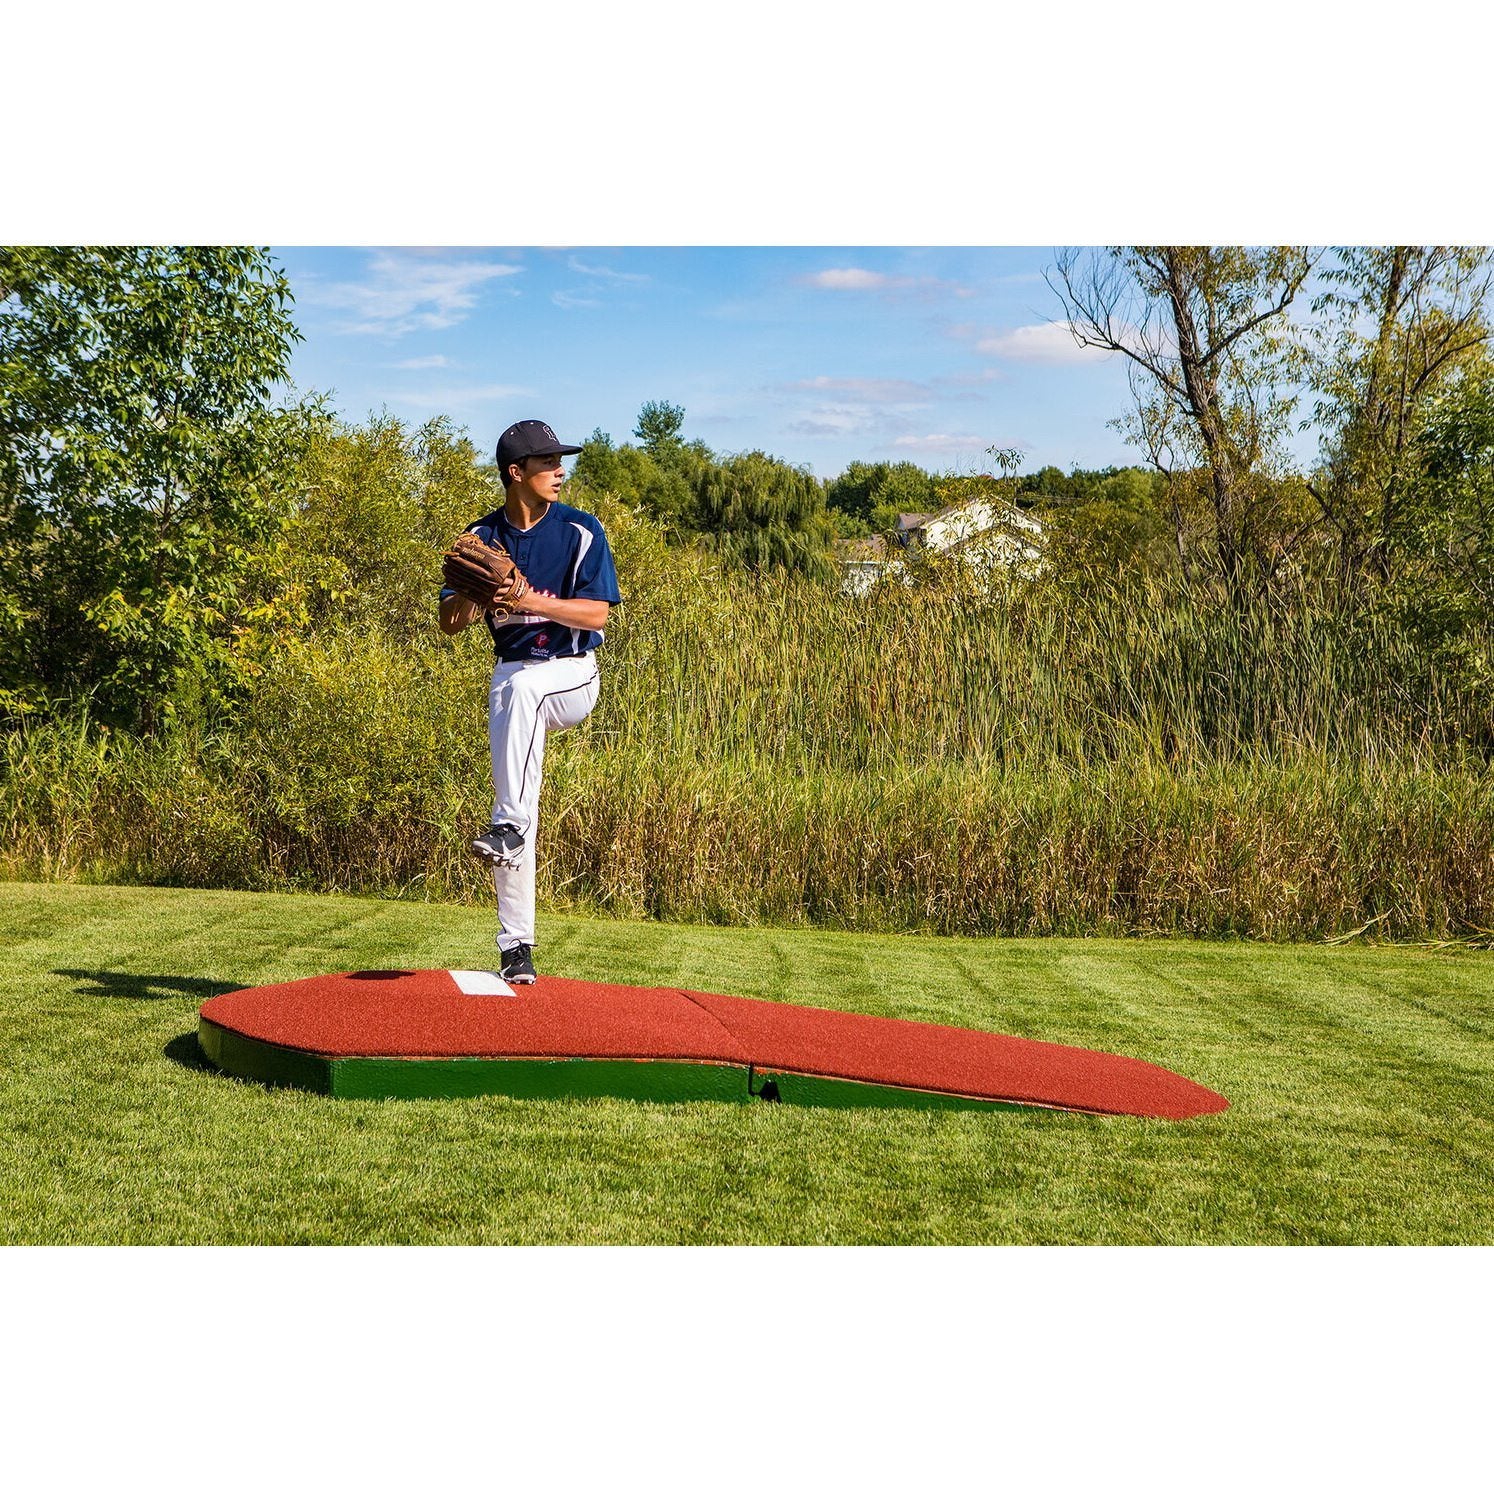 Portolite 10" Full Size 2-Piece Portable Practice Pitching Mound red pitcher standing on mound